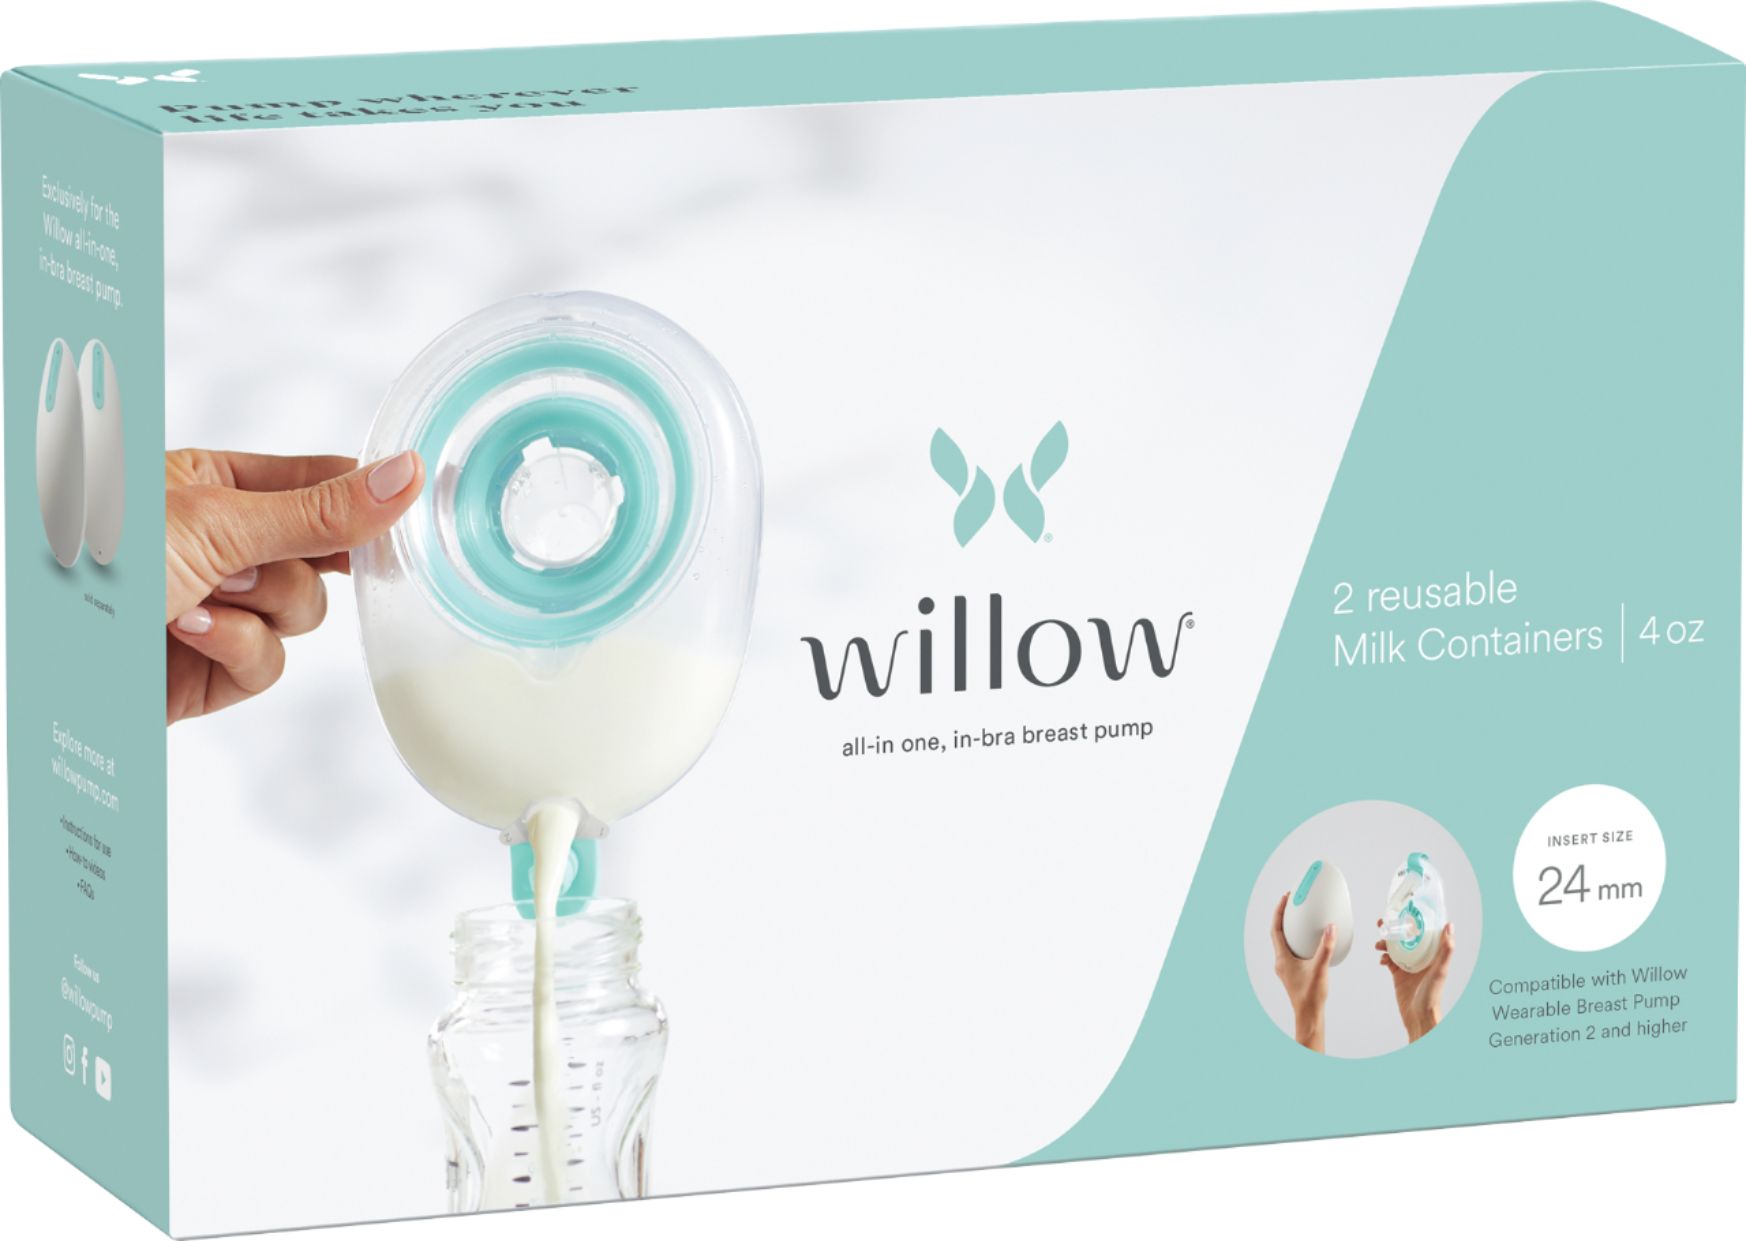  Willow 3.0 Pump Reusable Breast Milk Containers, 24mm Flange,  2 Ct, Holds 4 oz. Per Container, Breastfeeding Essential for The Willow 3.0  Wearable Breast Pump, Hands-Free Pumping : Baby